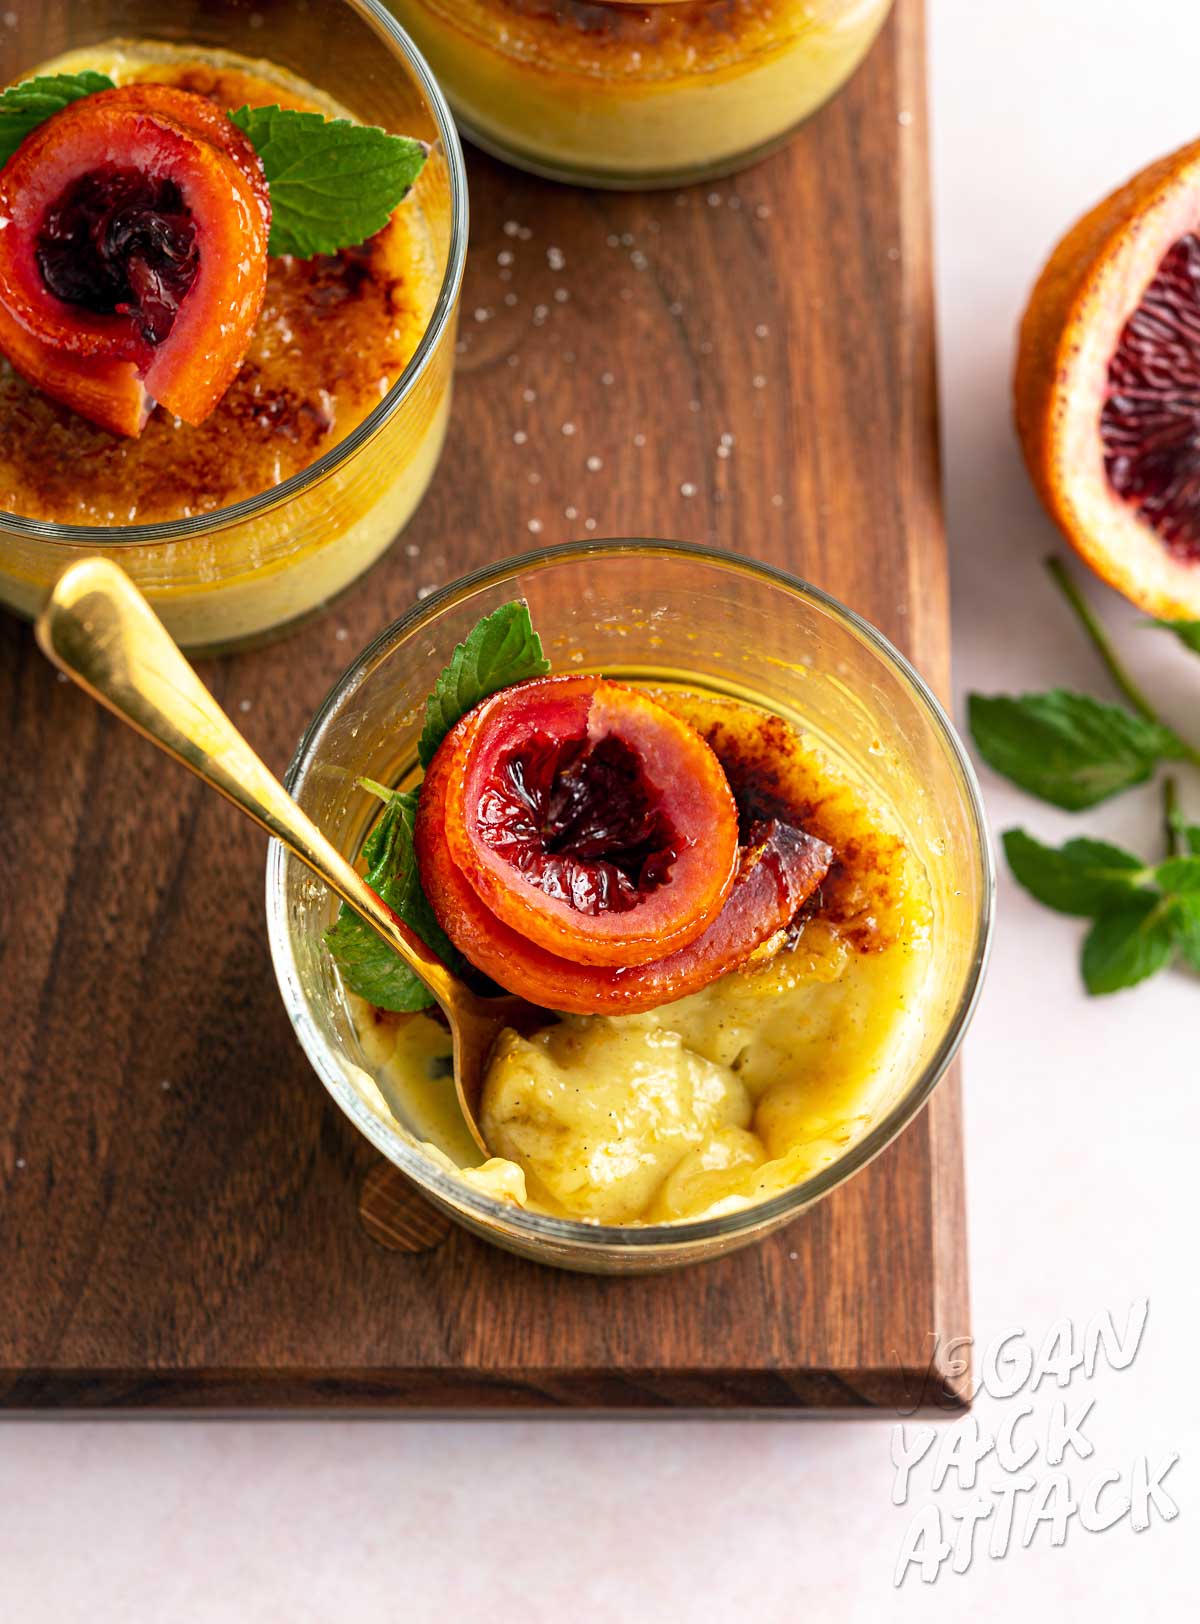 Image of spoon scooping out vegan creme brûlée on a wood board